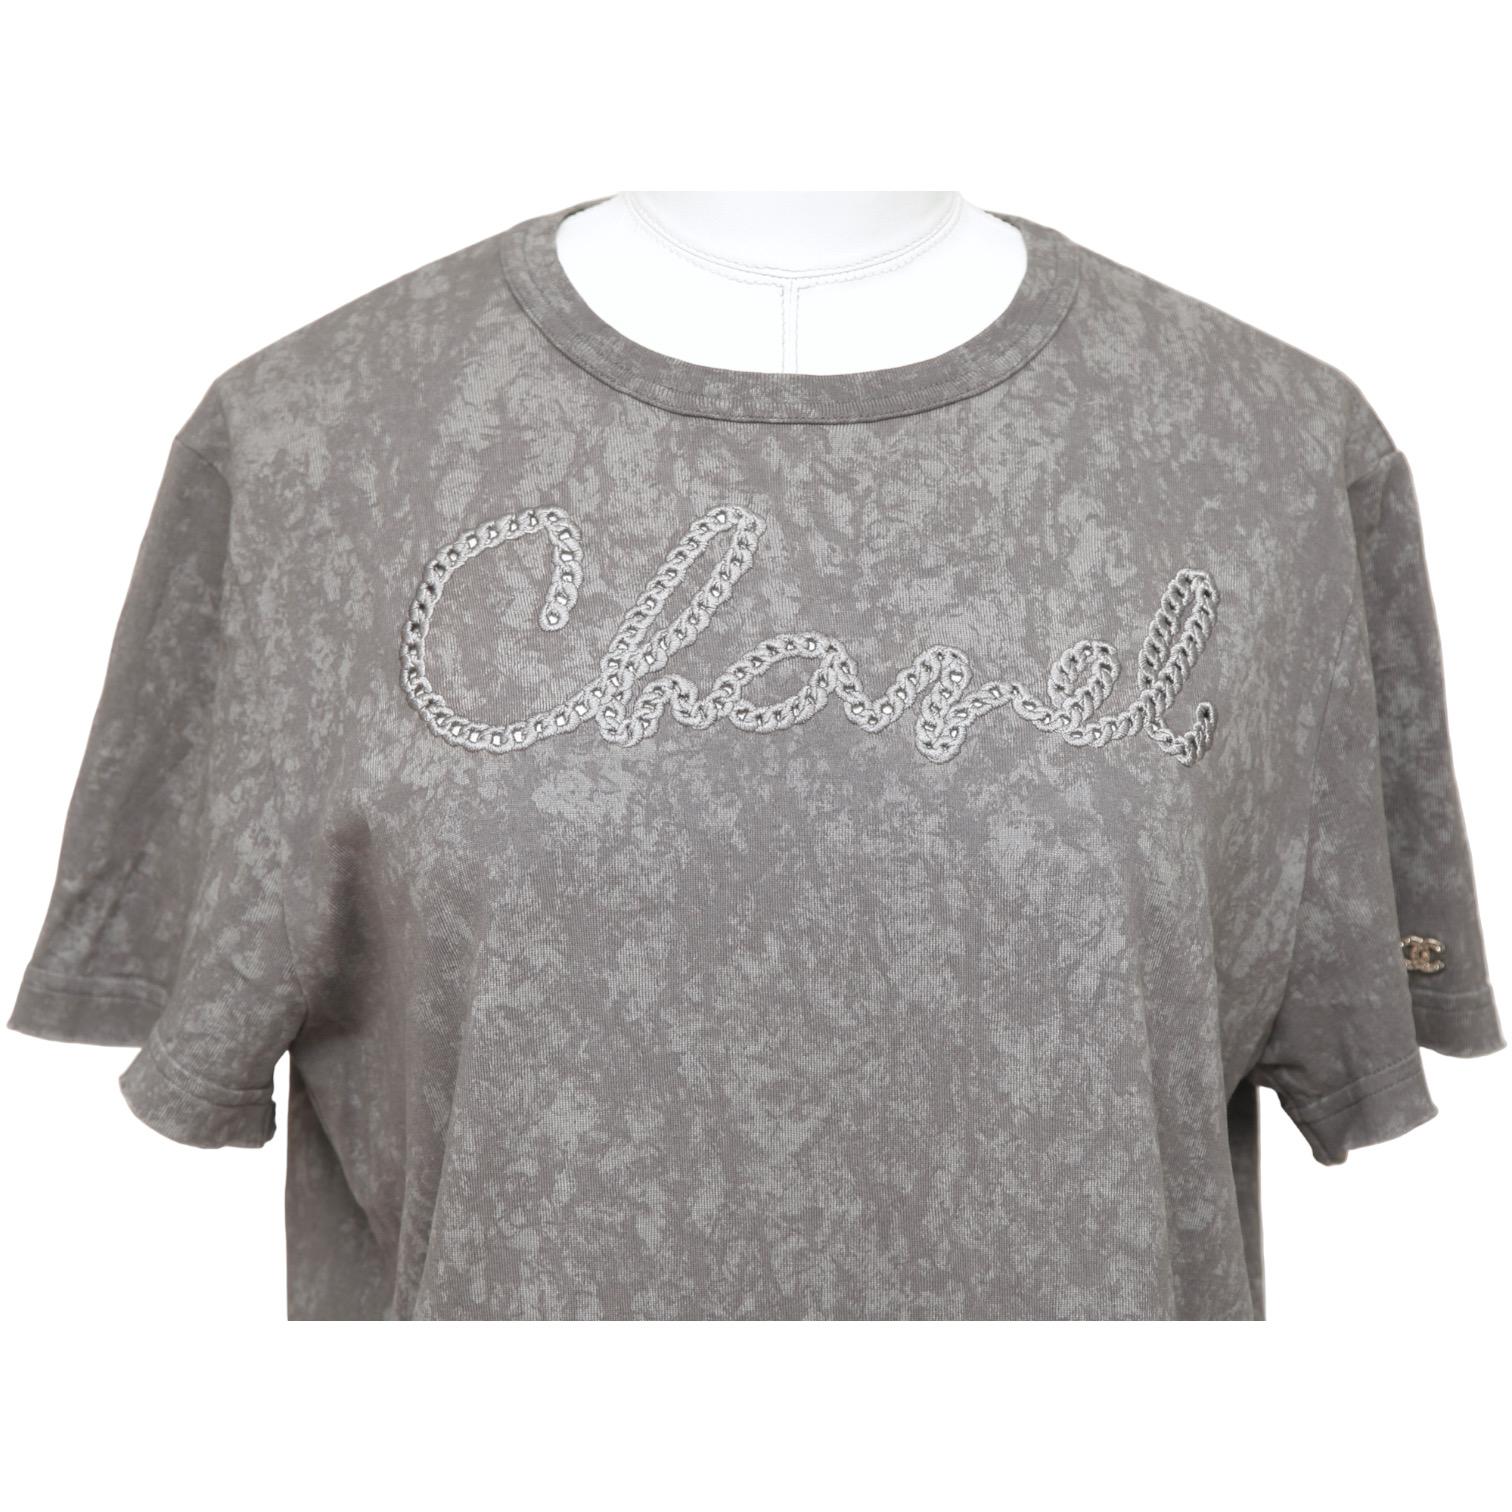 CHANEL Grey T-Shirt Top Shirt Short Sleeve Crew Neck Tie-Dye 34/36 2020 In Excellent Condition In Hollywood, FL